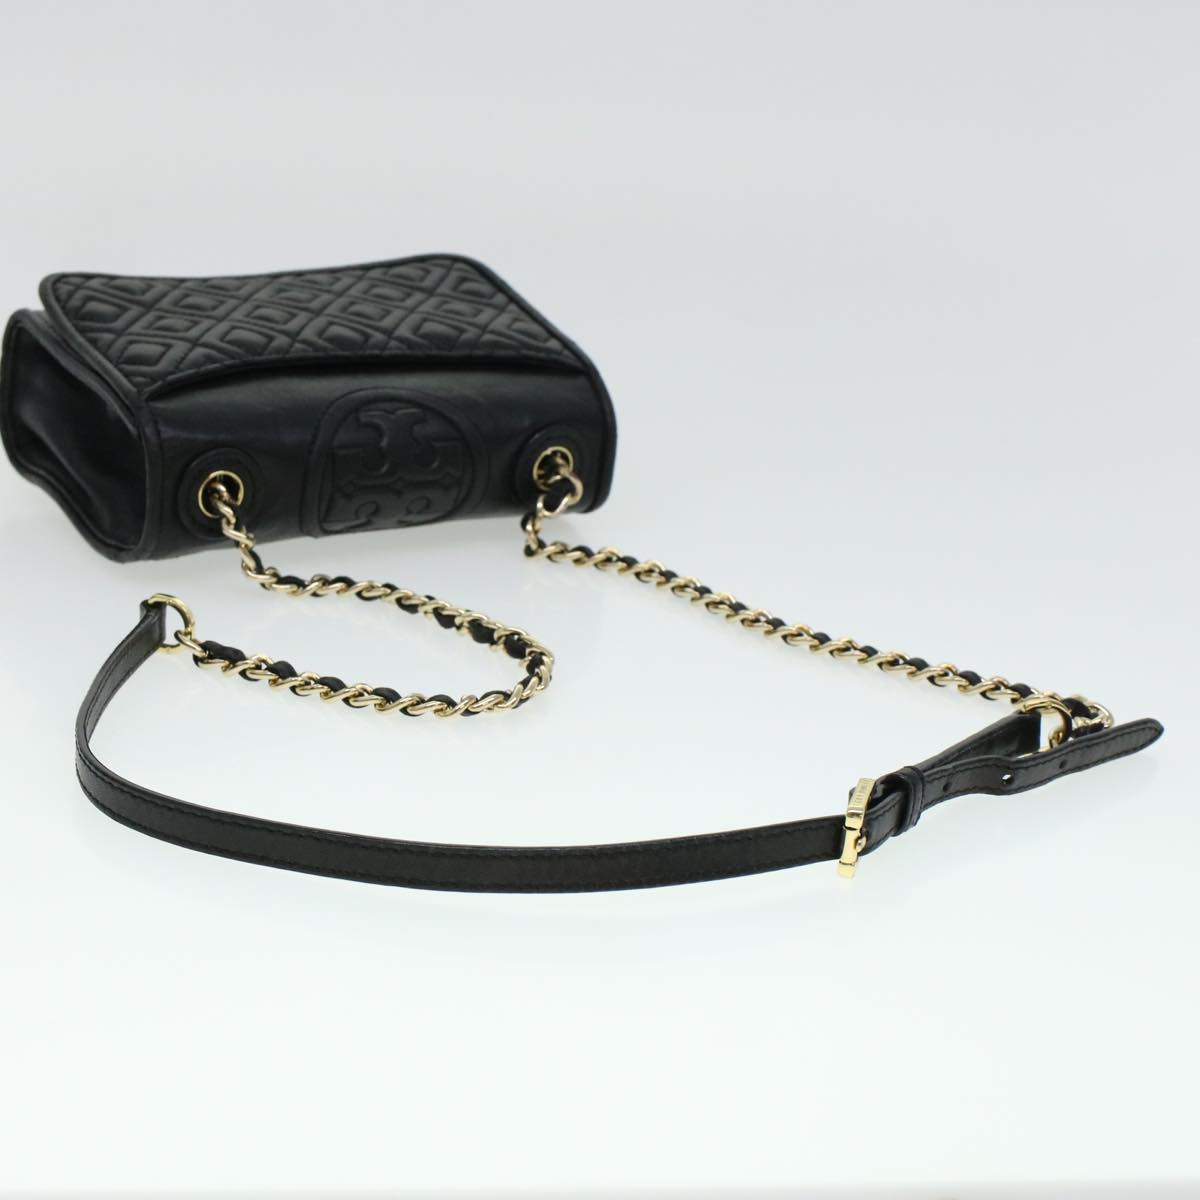 Tory Burch Chain Shoulder Bag Leather Black Auth Am4322